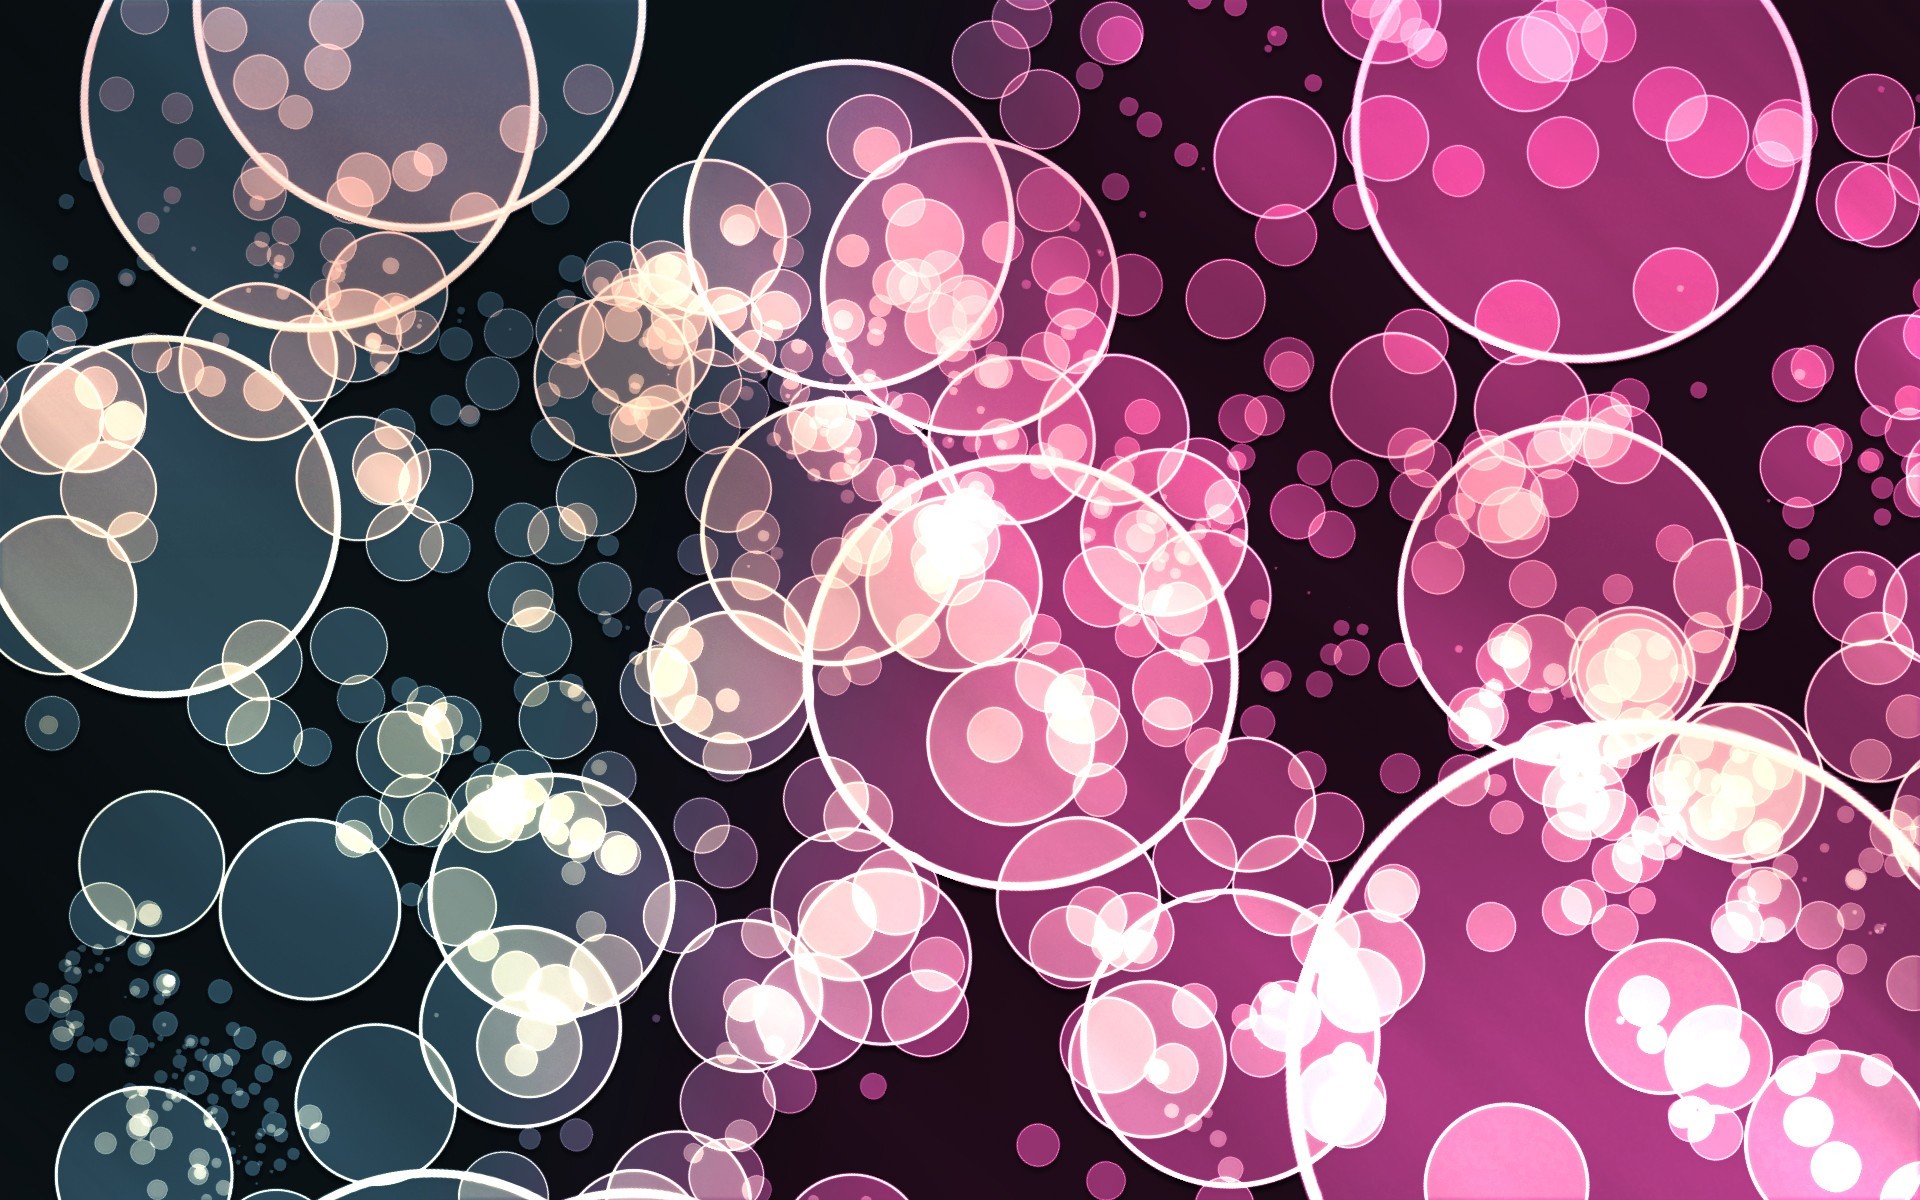 Pink Bubble Wallpapers.